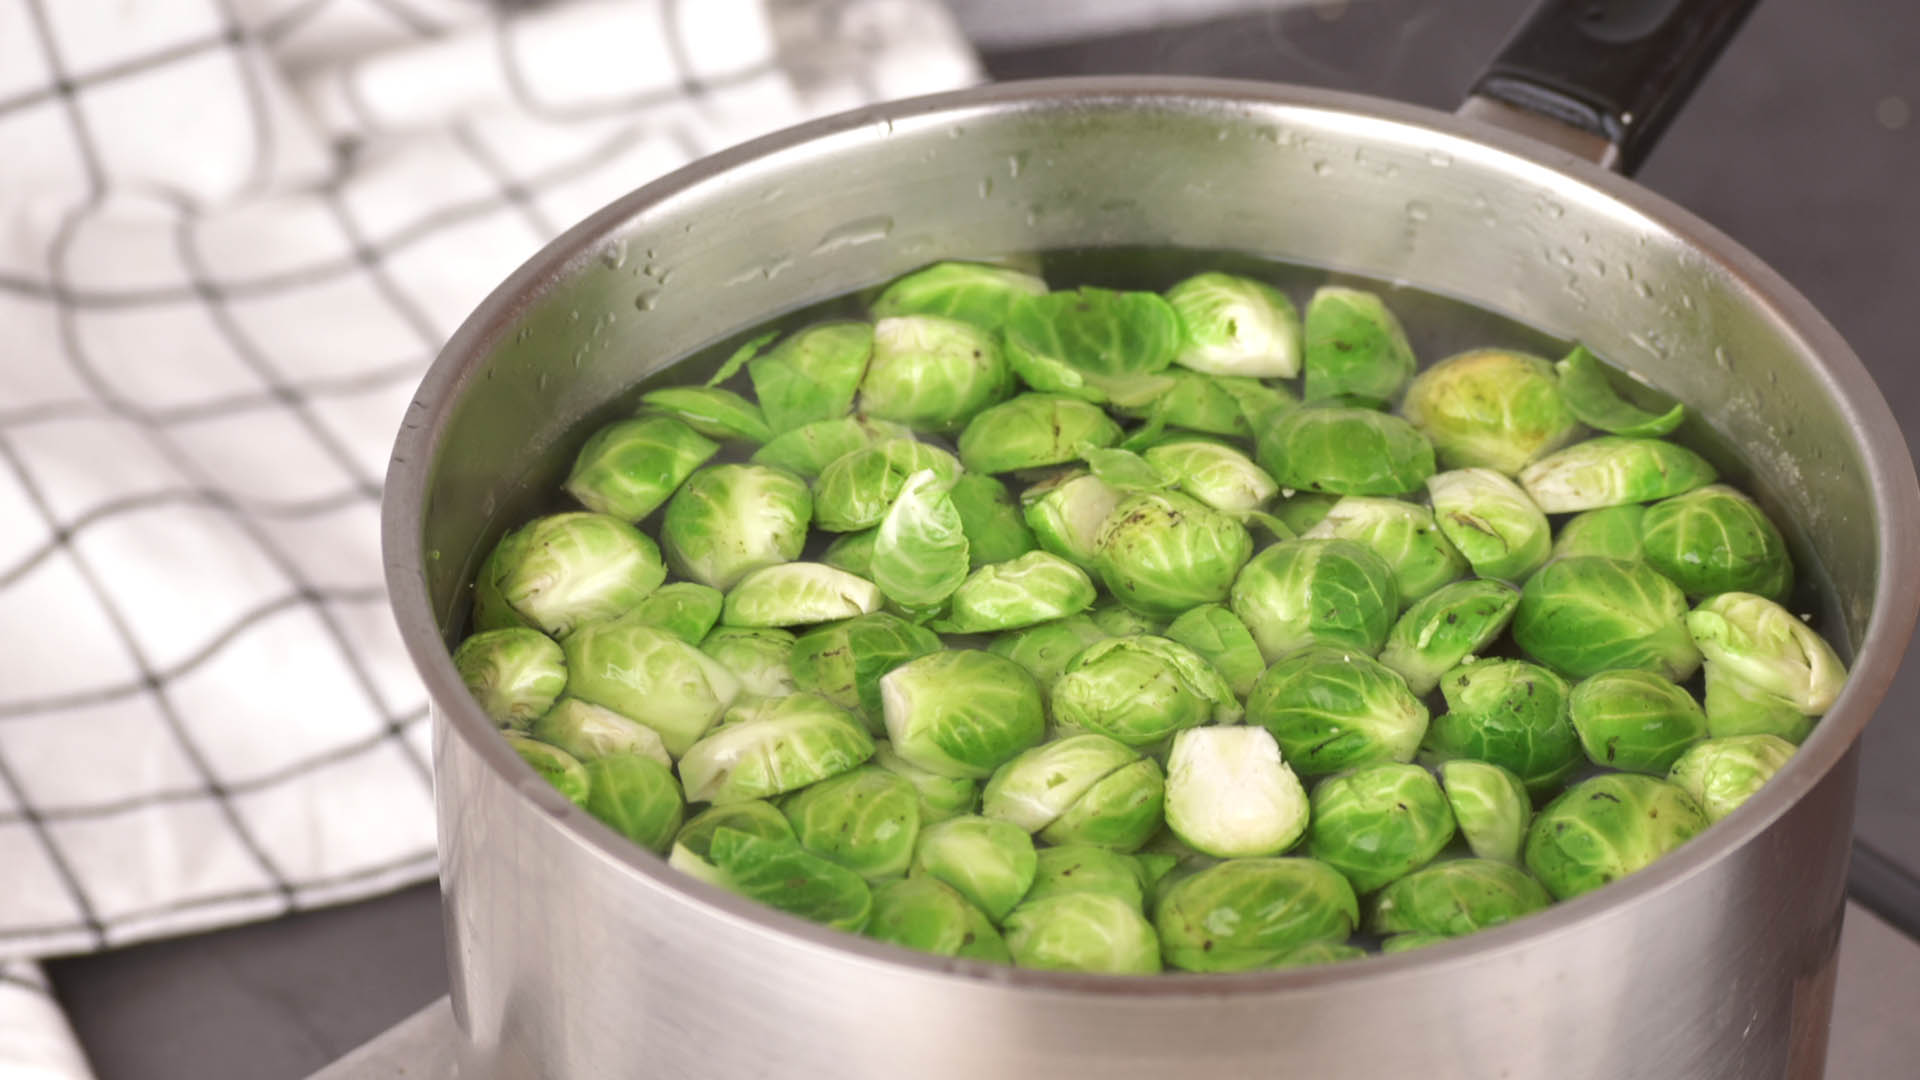 Brussel Sprout Wallpapers